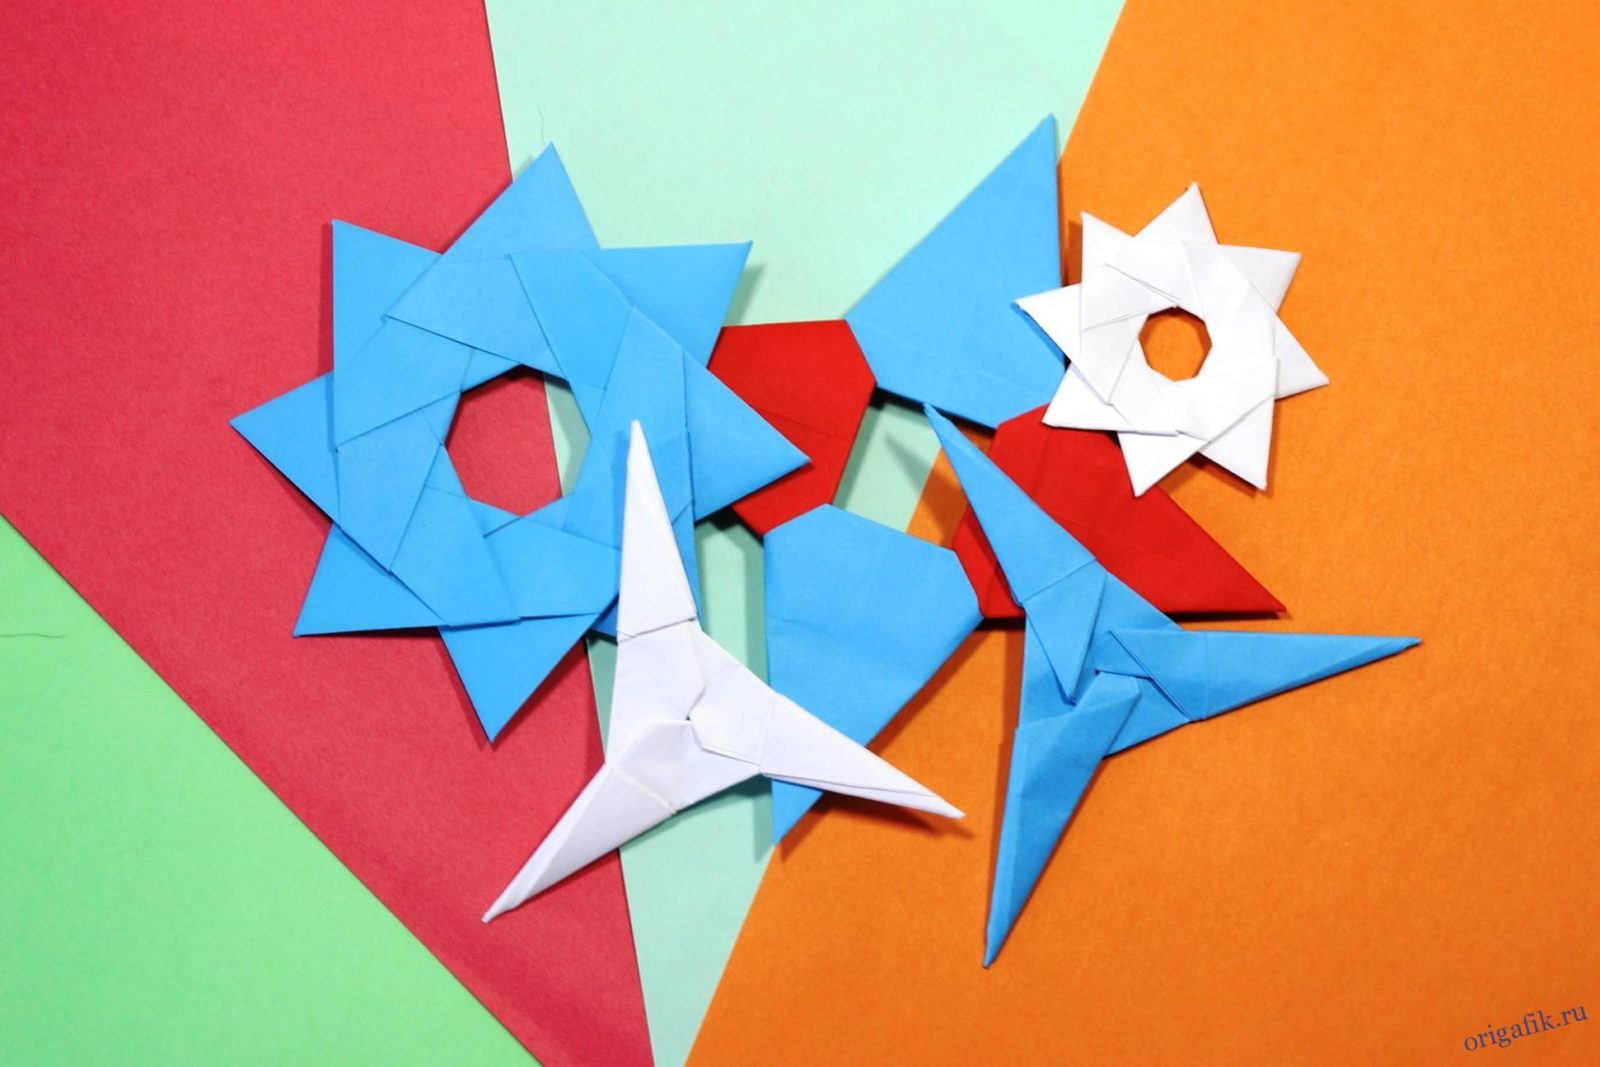 YouTube | Childrens drawings, Origami, Childrens